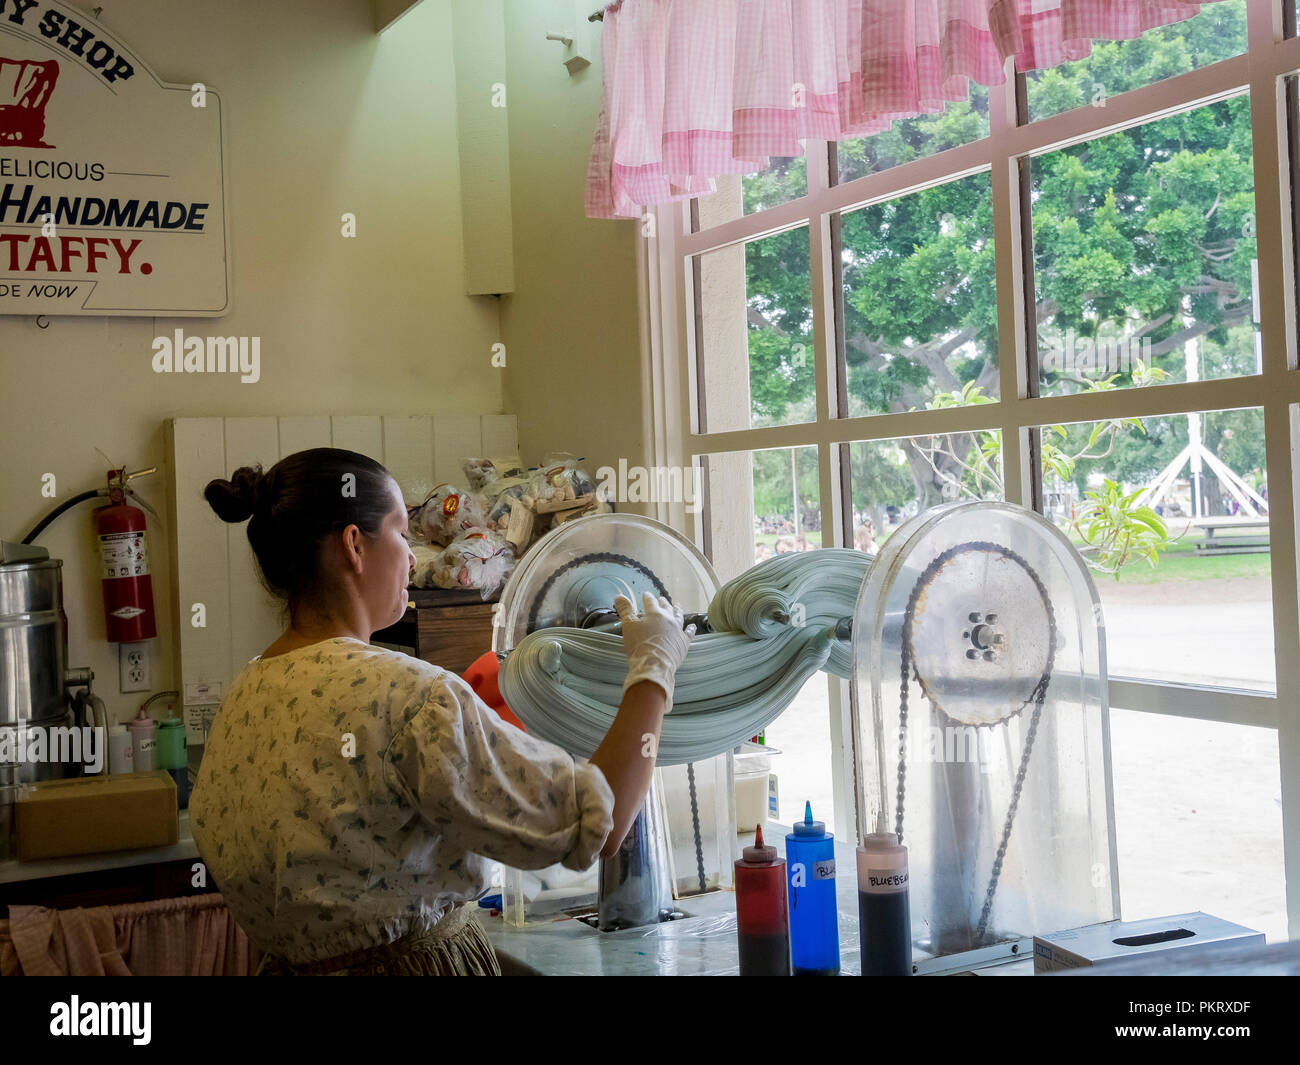 San Diego, AUG 2: People costume in ancient style making candy in the historical old town on AUG 2, 2014 at San Diego, California Stock Photo